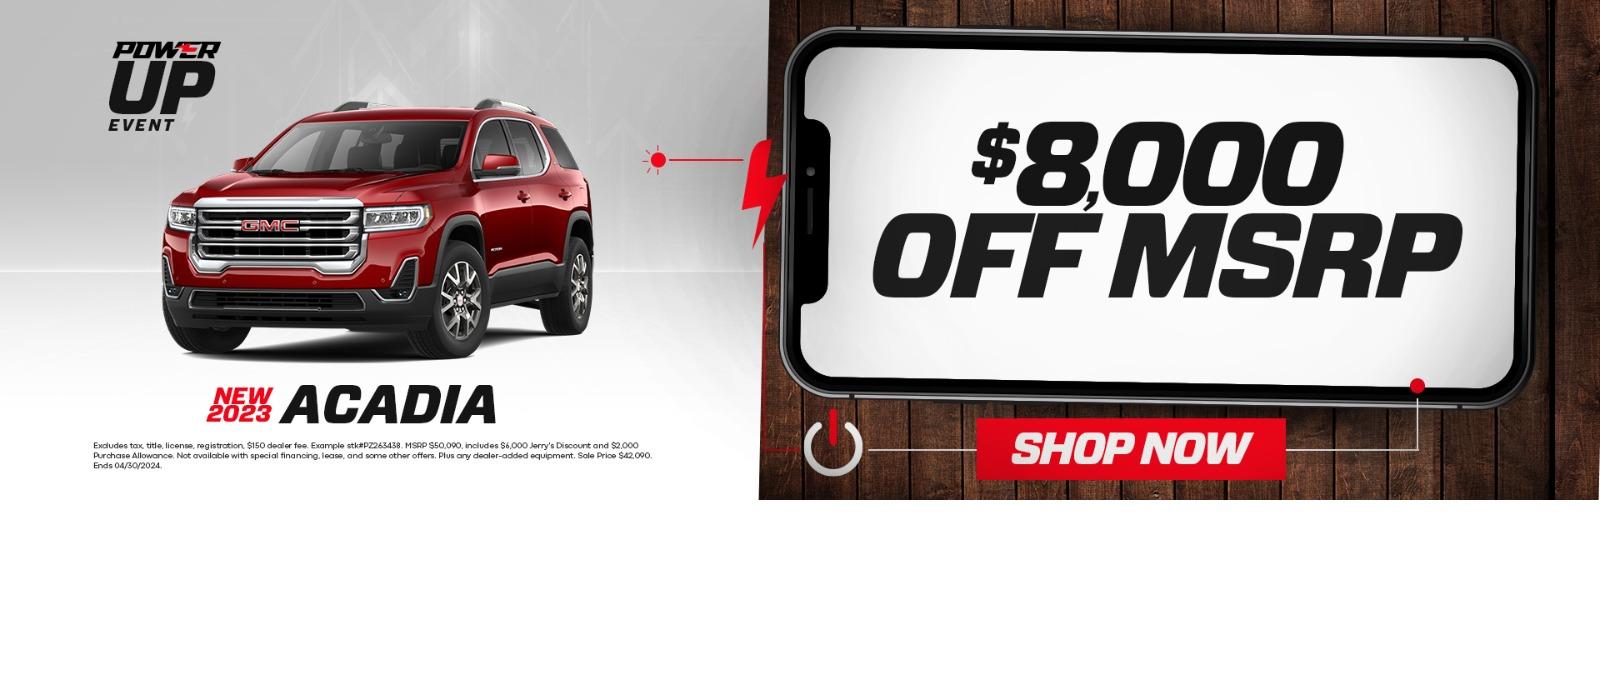 NEW 2023 GMC ACADIA Offer Weatherford